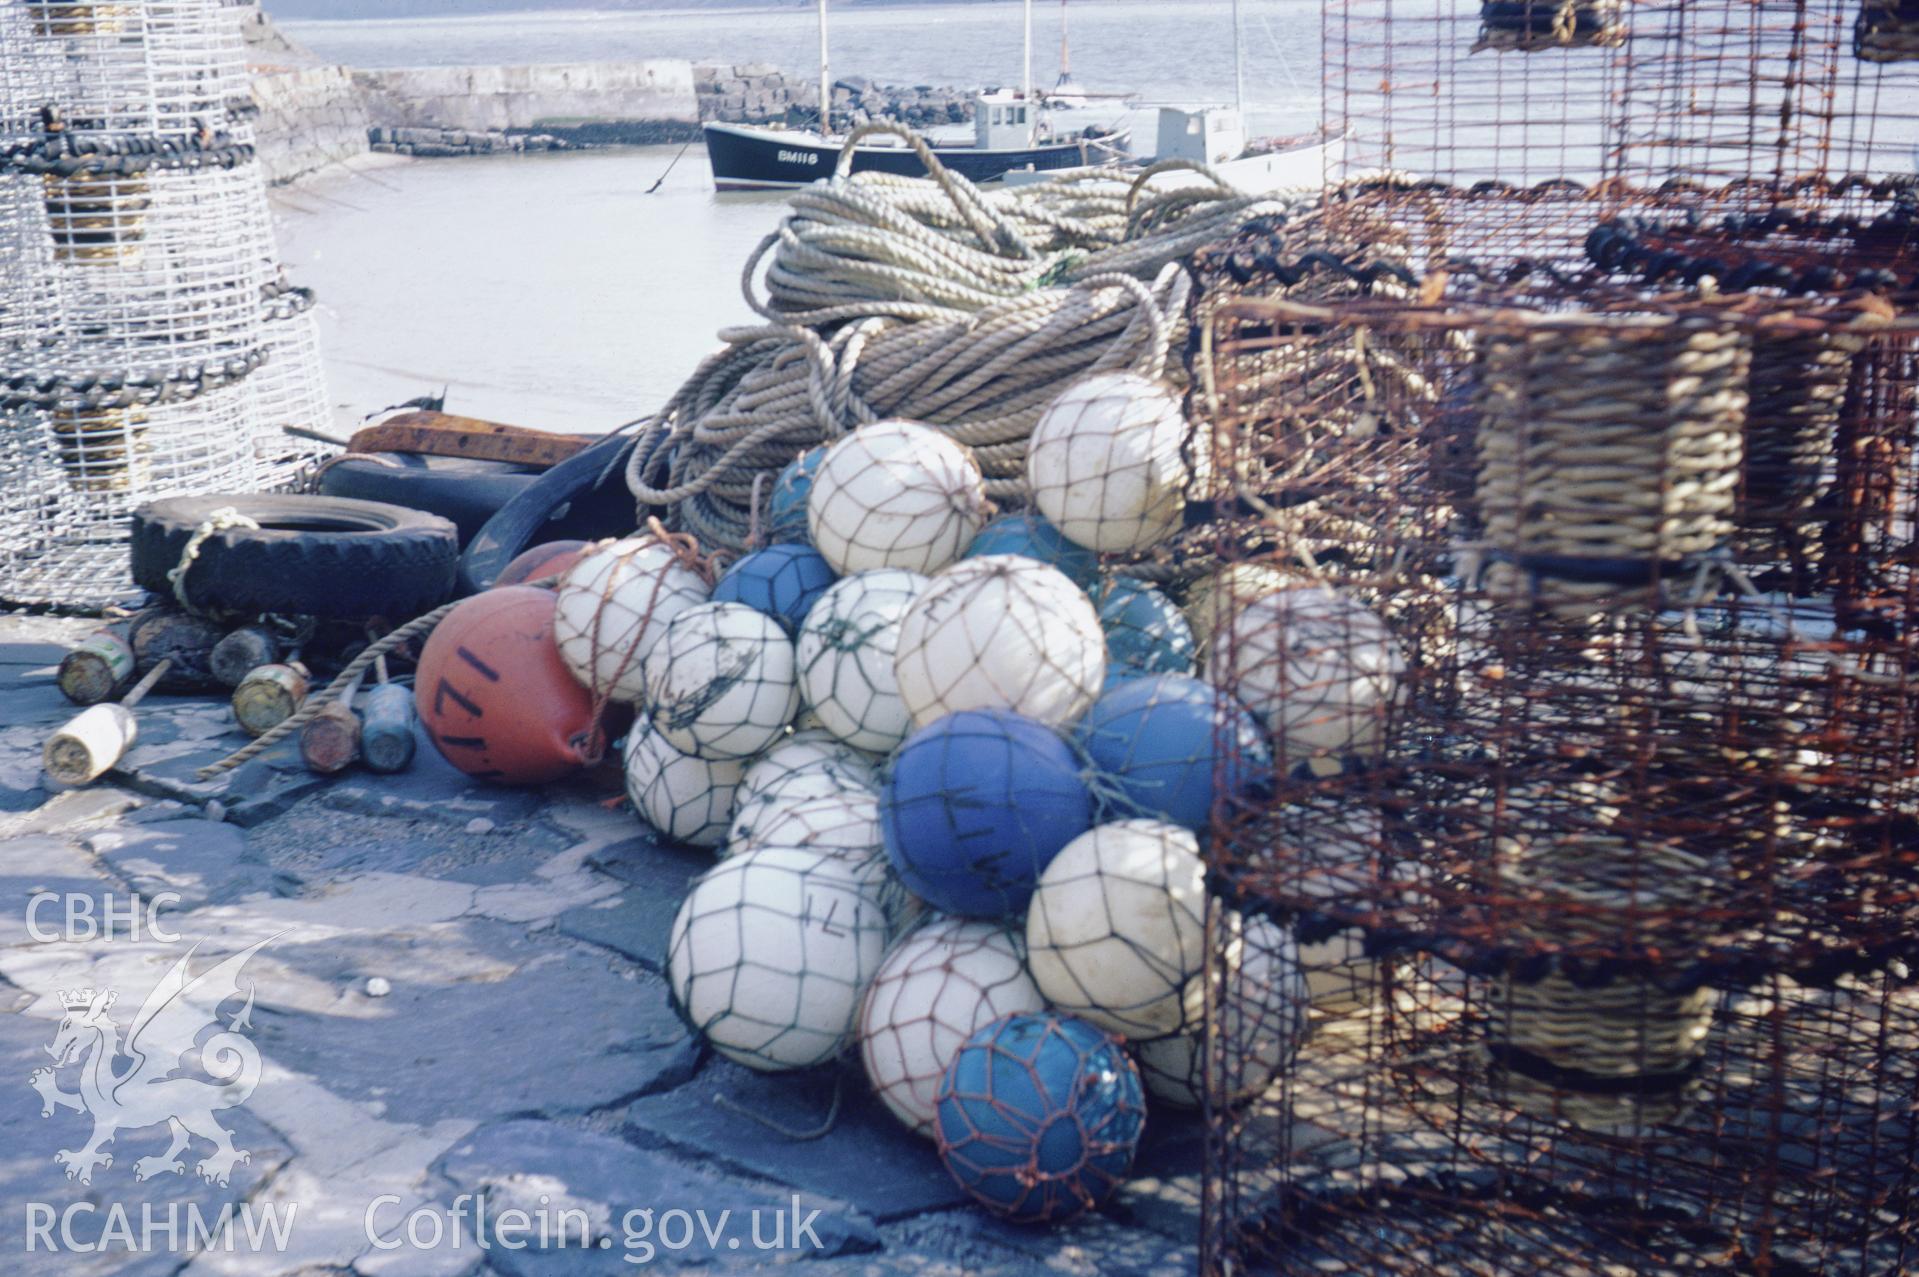 Colour 35mm slide showing lobster pots at New Quay Harbour, Ceredigion, by Dylan Roberts.